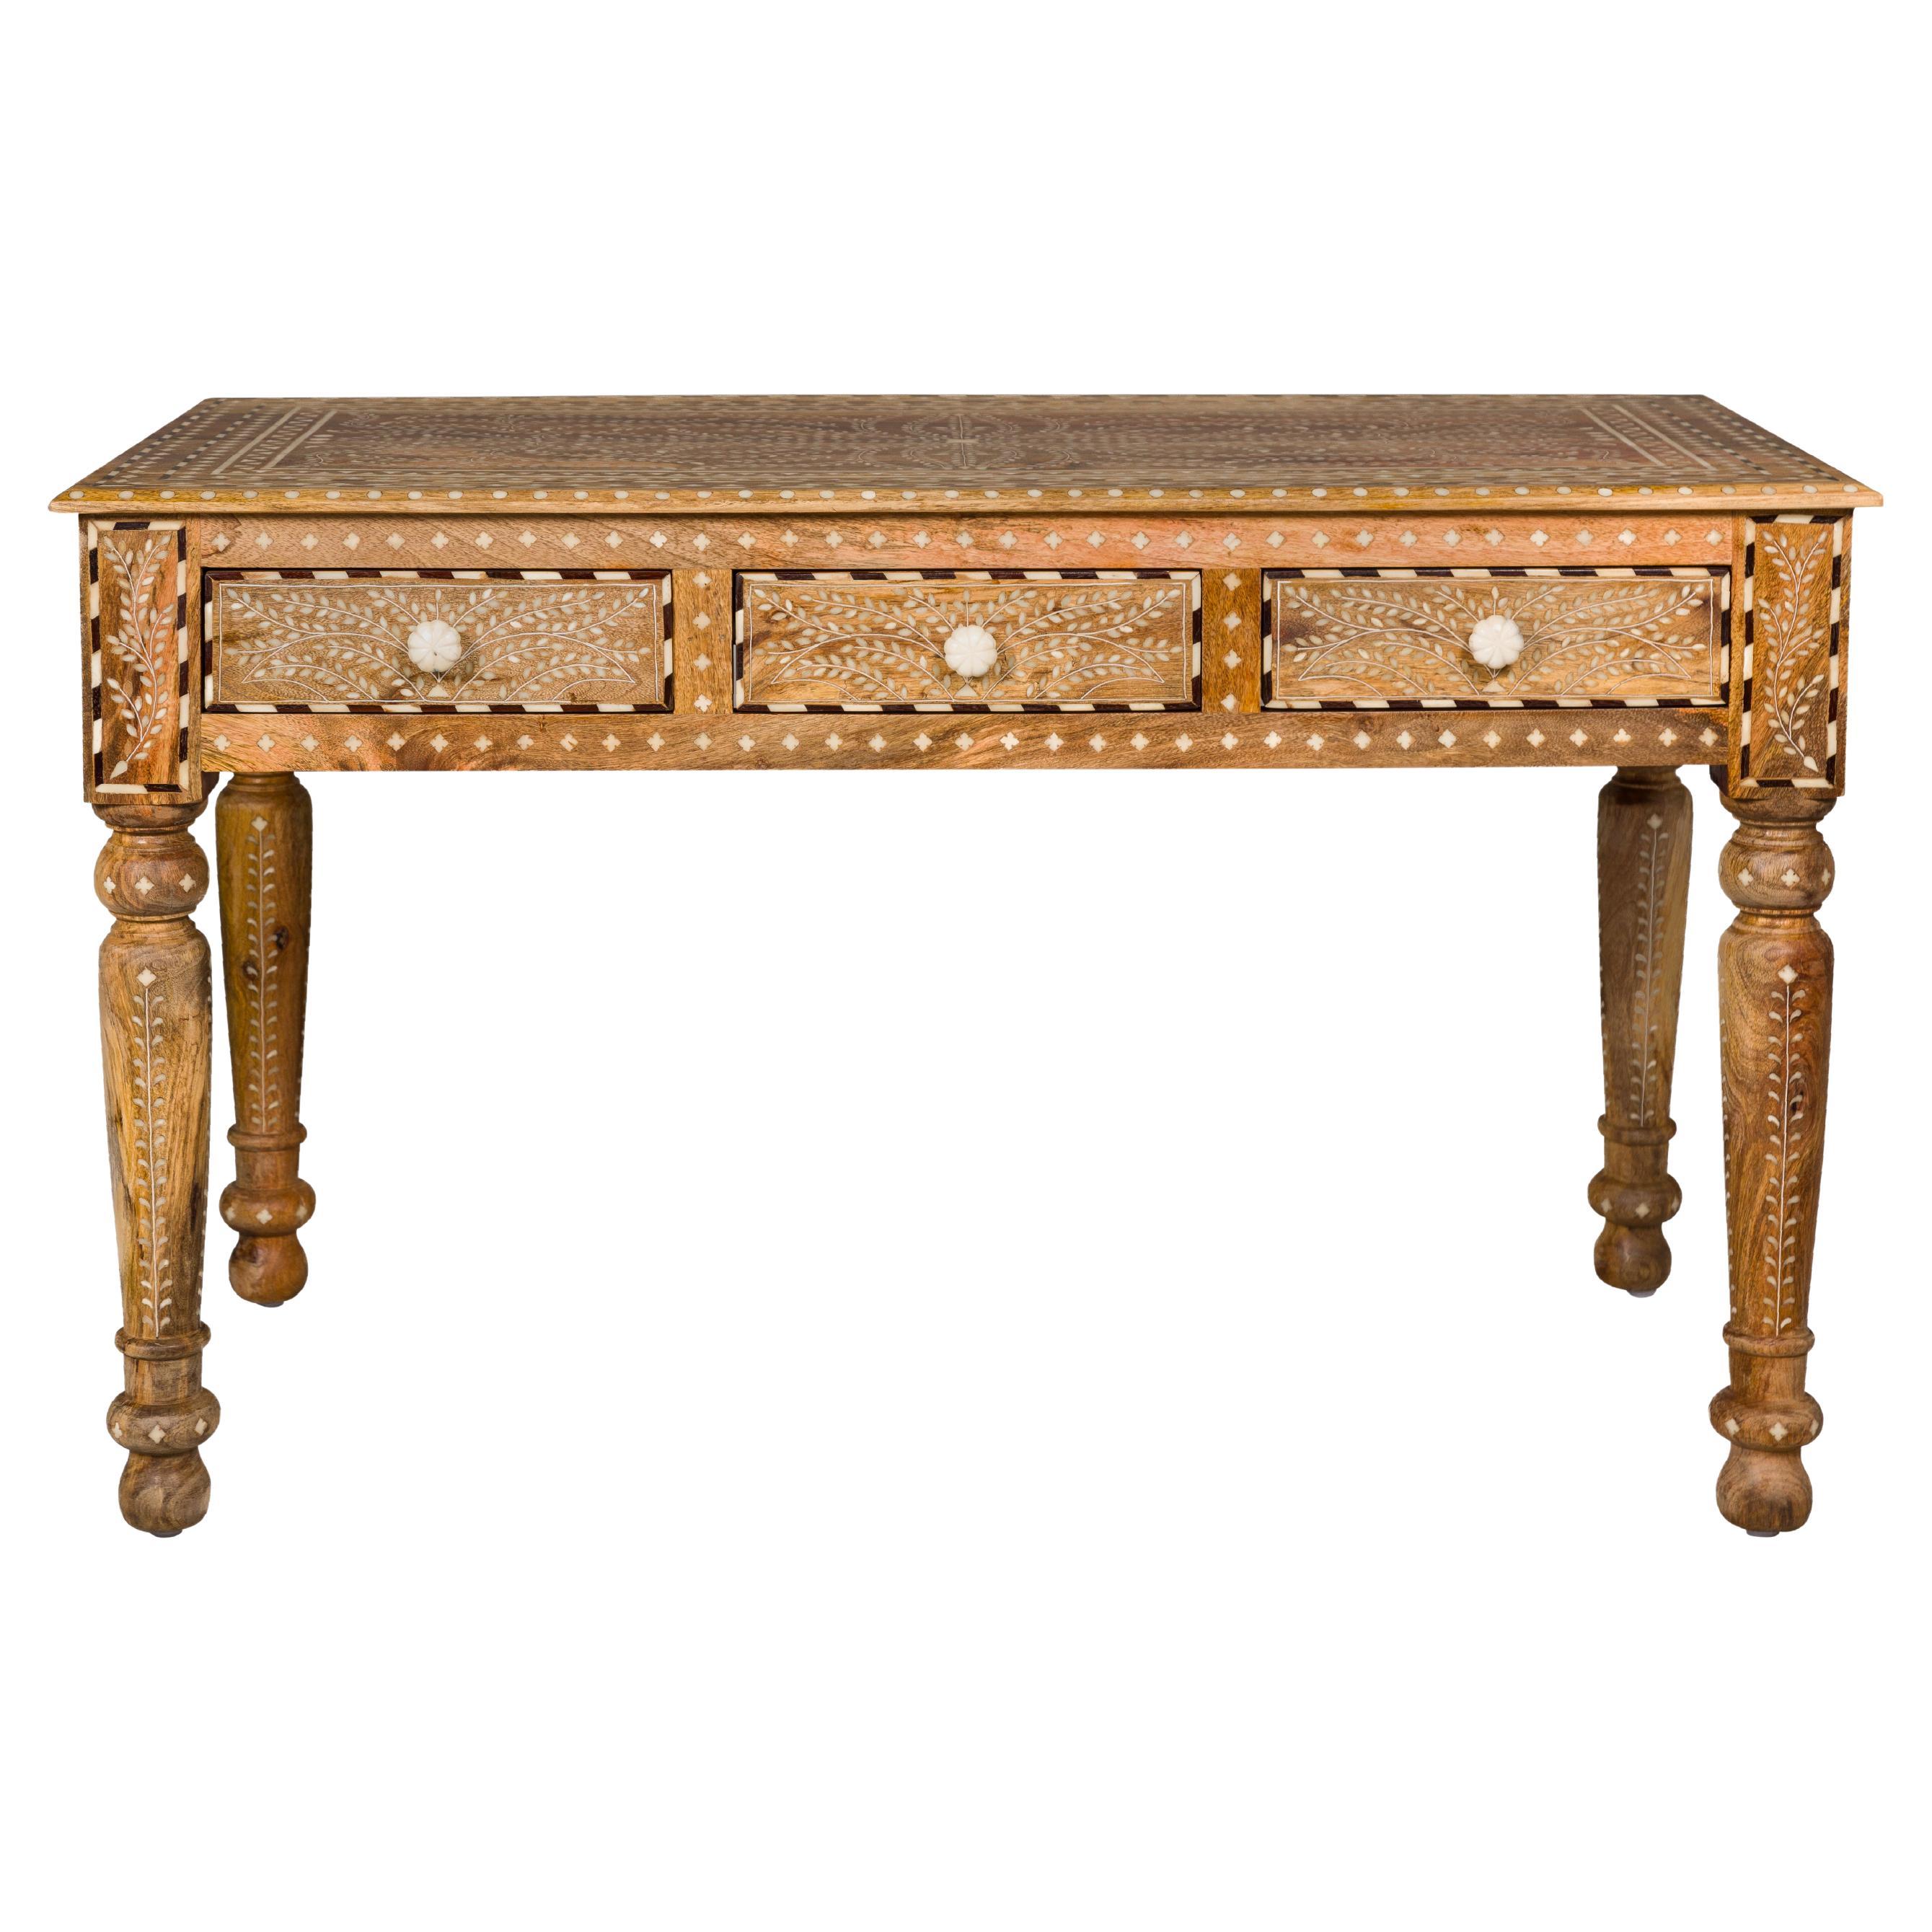 Anglo Indian Style Mango Wood Desk with Drawers, Bone Inlay and Light Patina